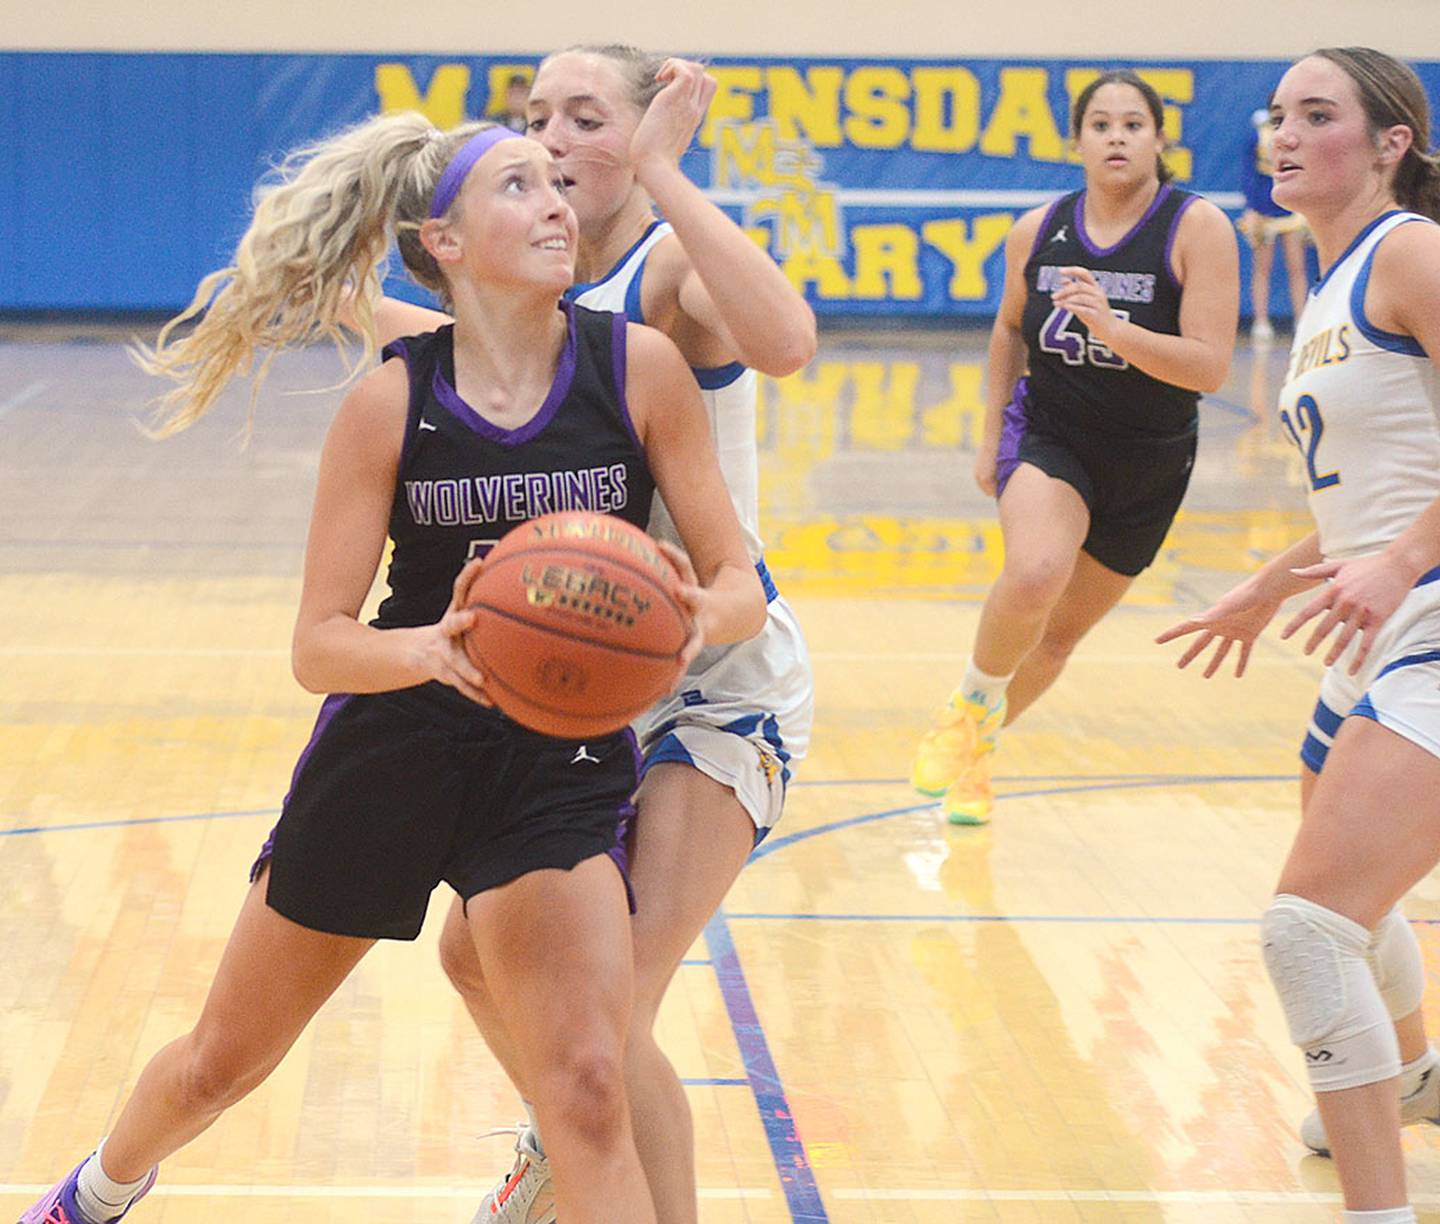 Izzy Eisbach of Nodaway Valley drives to the basket during Thursday's game at Martensdale-St. Marys. Eisbach made 4-of-7 3-pointers in scoring a game-high 29 points for the Class 2A fifth-ranked Wolverines, who were edged by the Class 1A third-ranked Blue Devils, 58-56. Sophia Shannon had 16 points and 11 rebounds for Martensdale-St. Marys, which rallied from a 32-15 halftime deficit. Lindsey Davis added 18 points and seven rebounds for the 6-1 Wolverines, who host Mount Ayr Tuesday night.